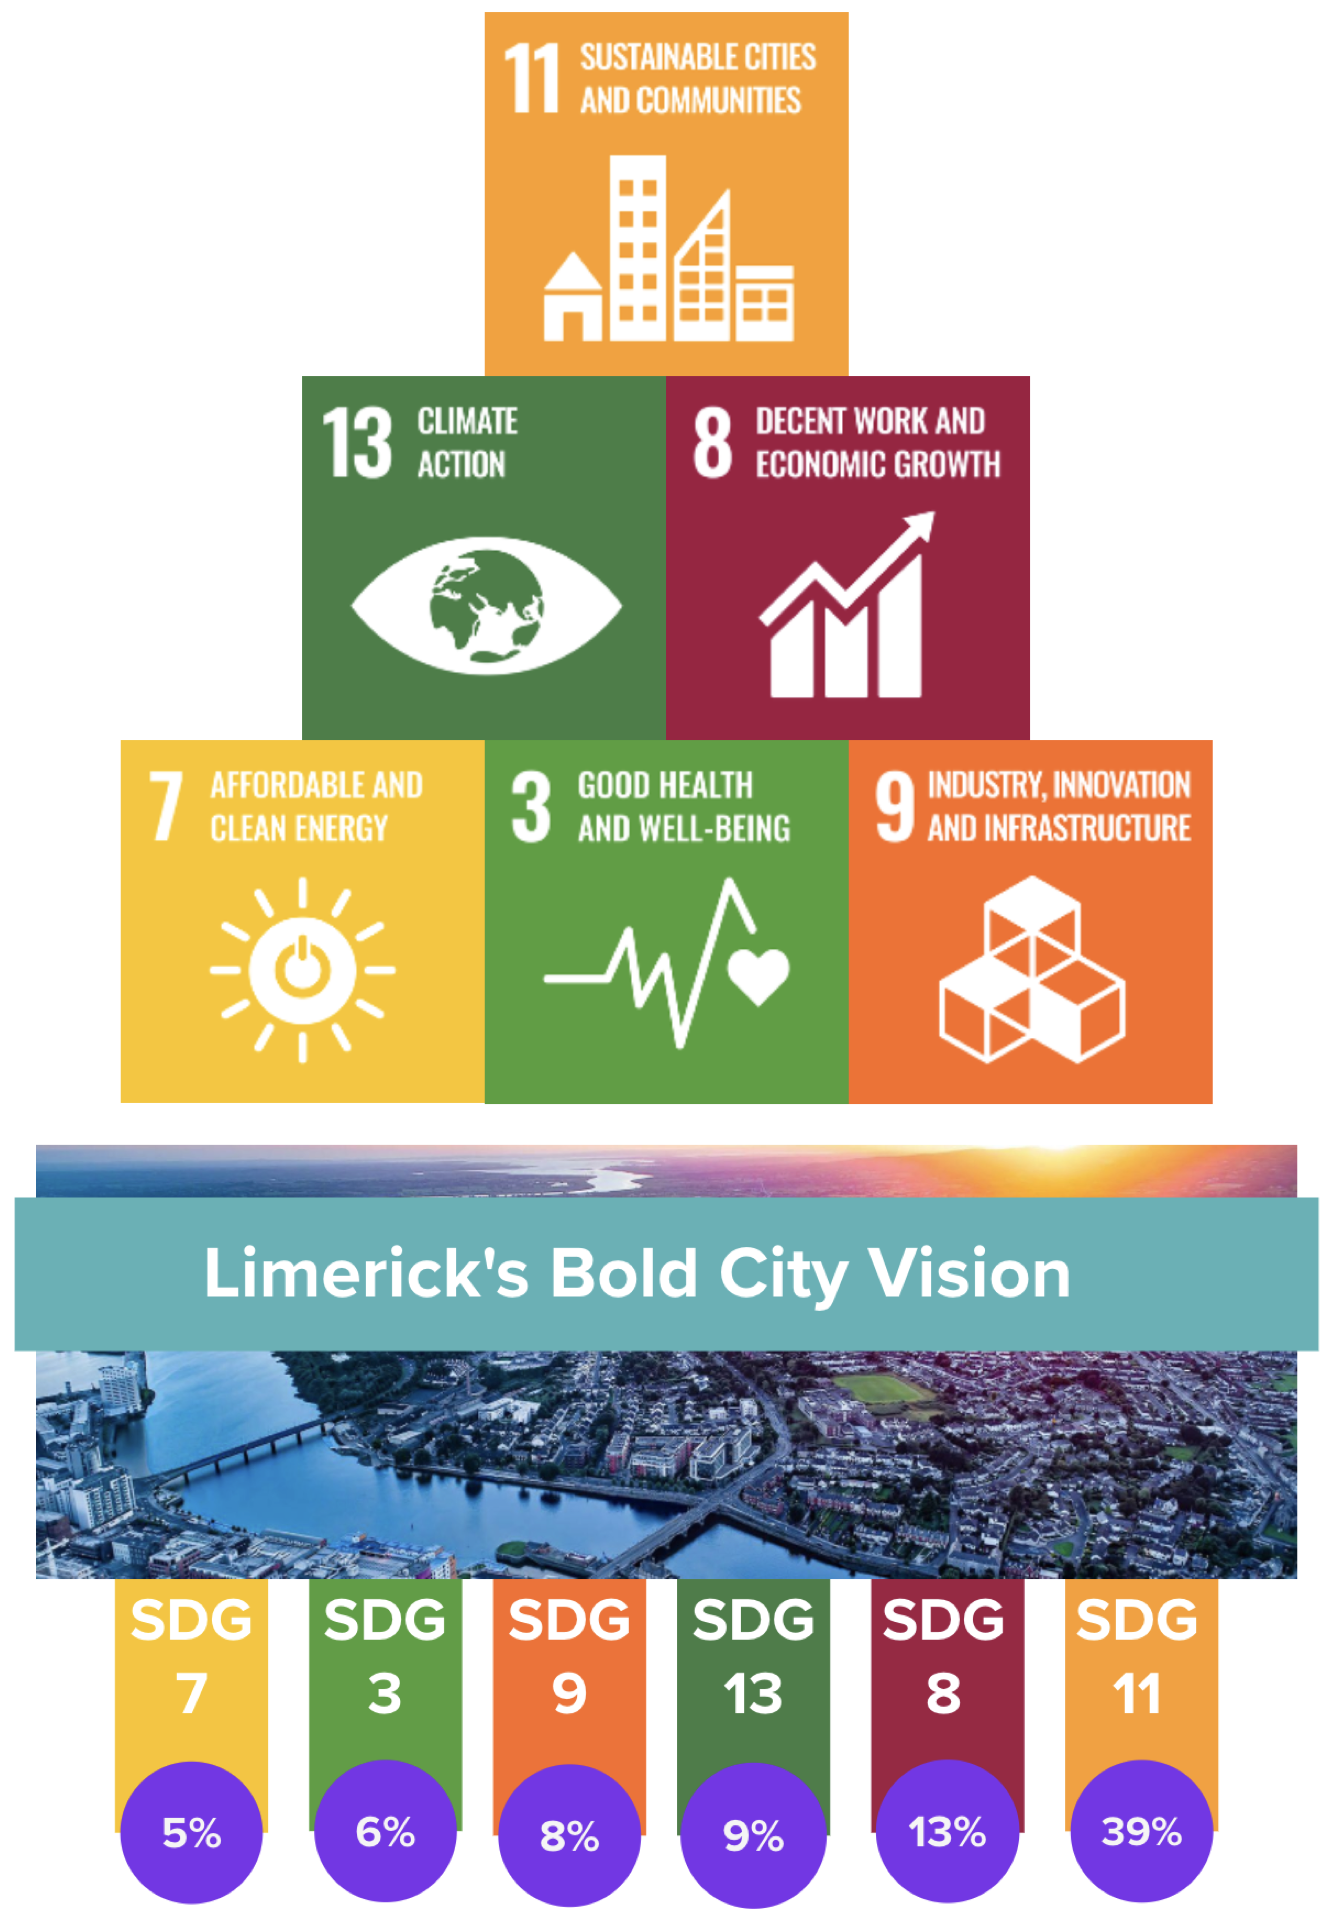 The UN SDGs identified as being the most important by people in Limerick during the Limerick City and County Development Plan consultation in 2021.